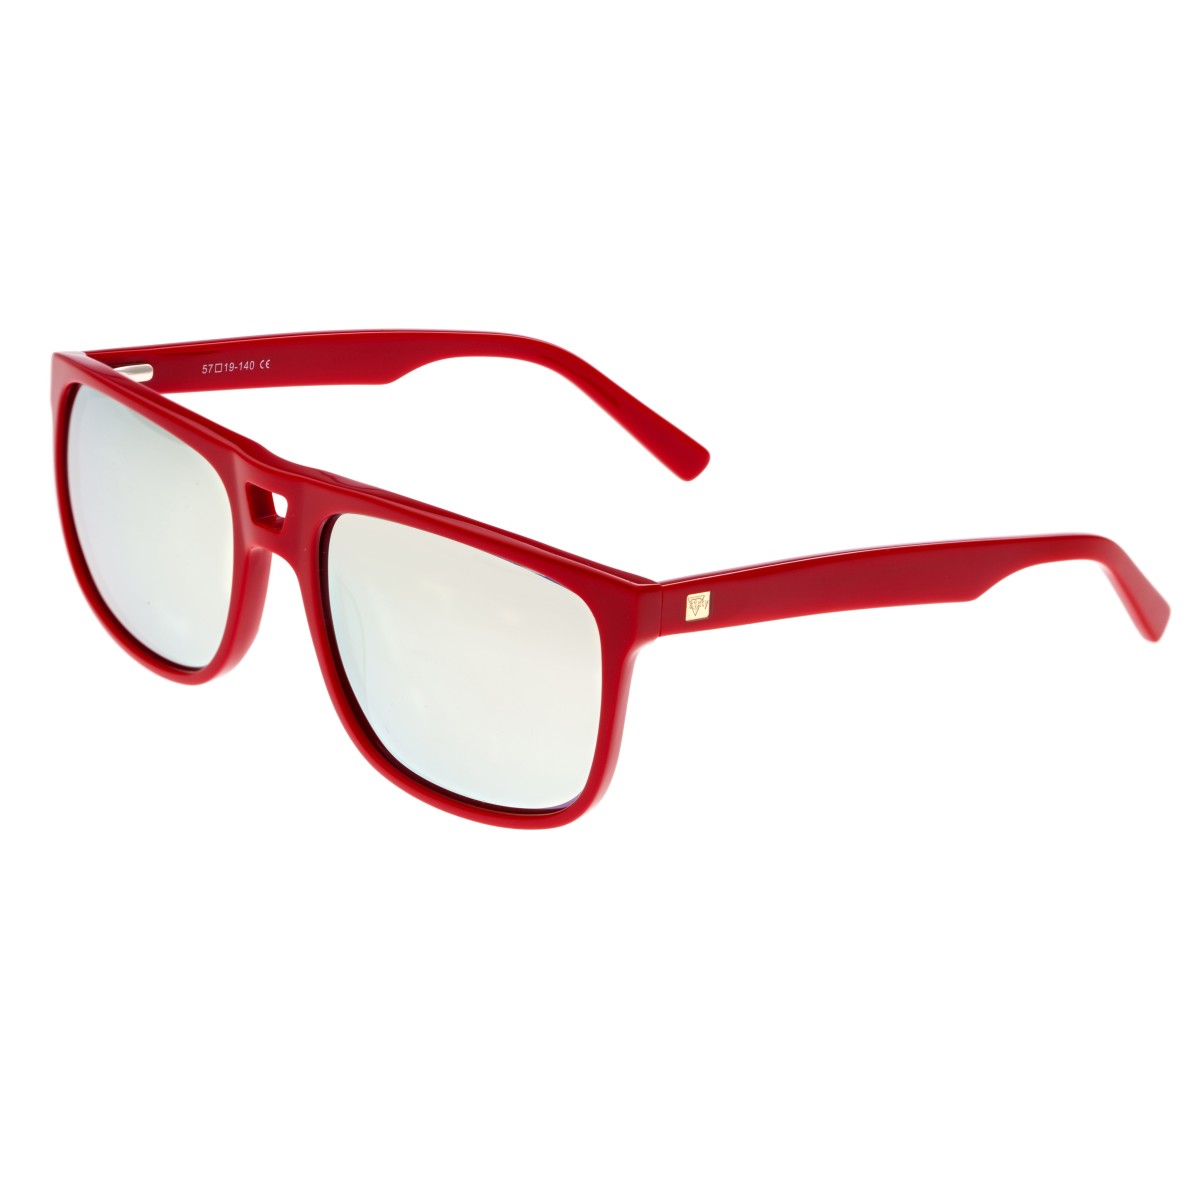 Sixty One Morea Polarized Sunglasses - Red/Gold - SIXS134GD